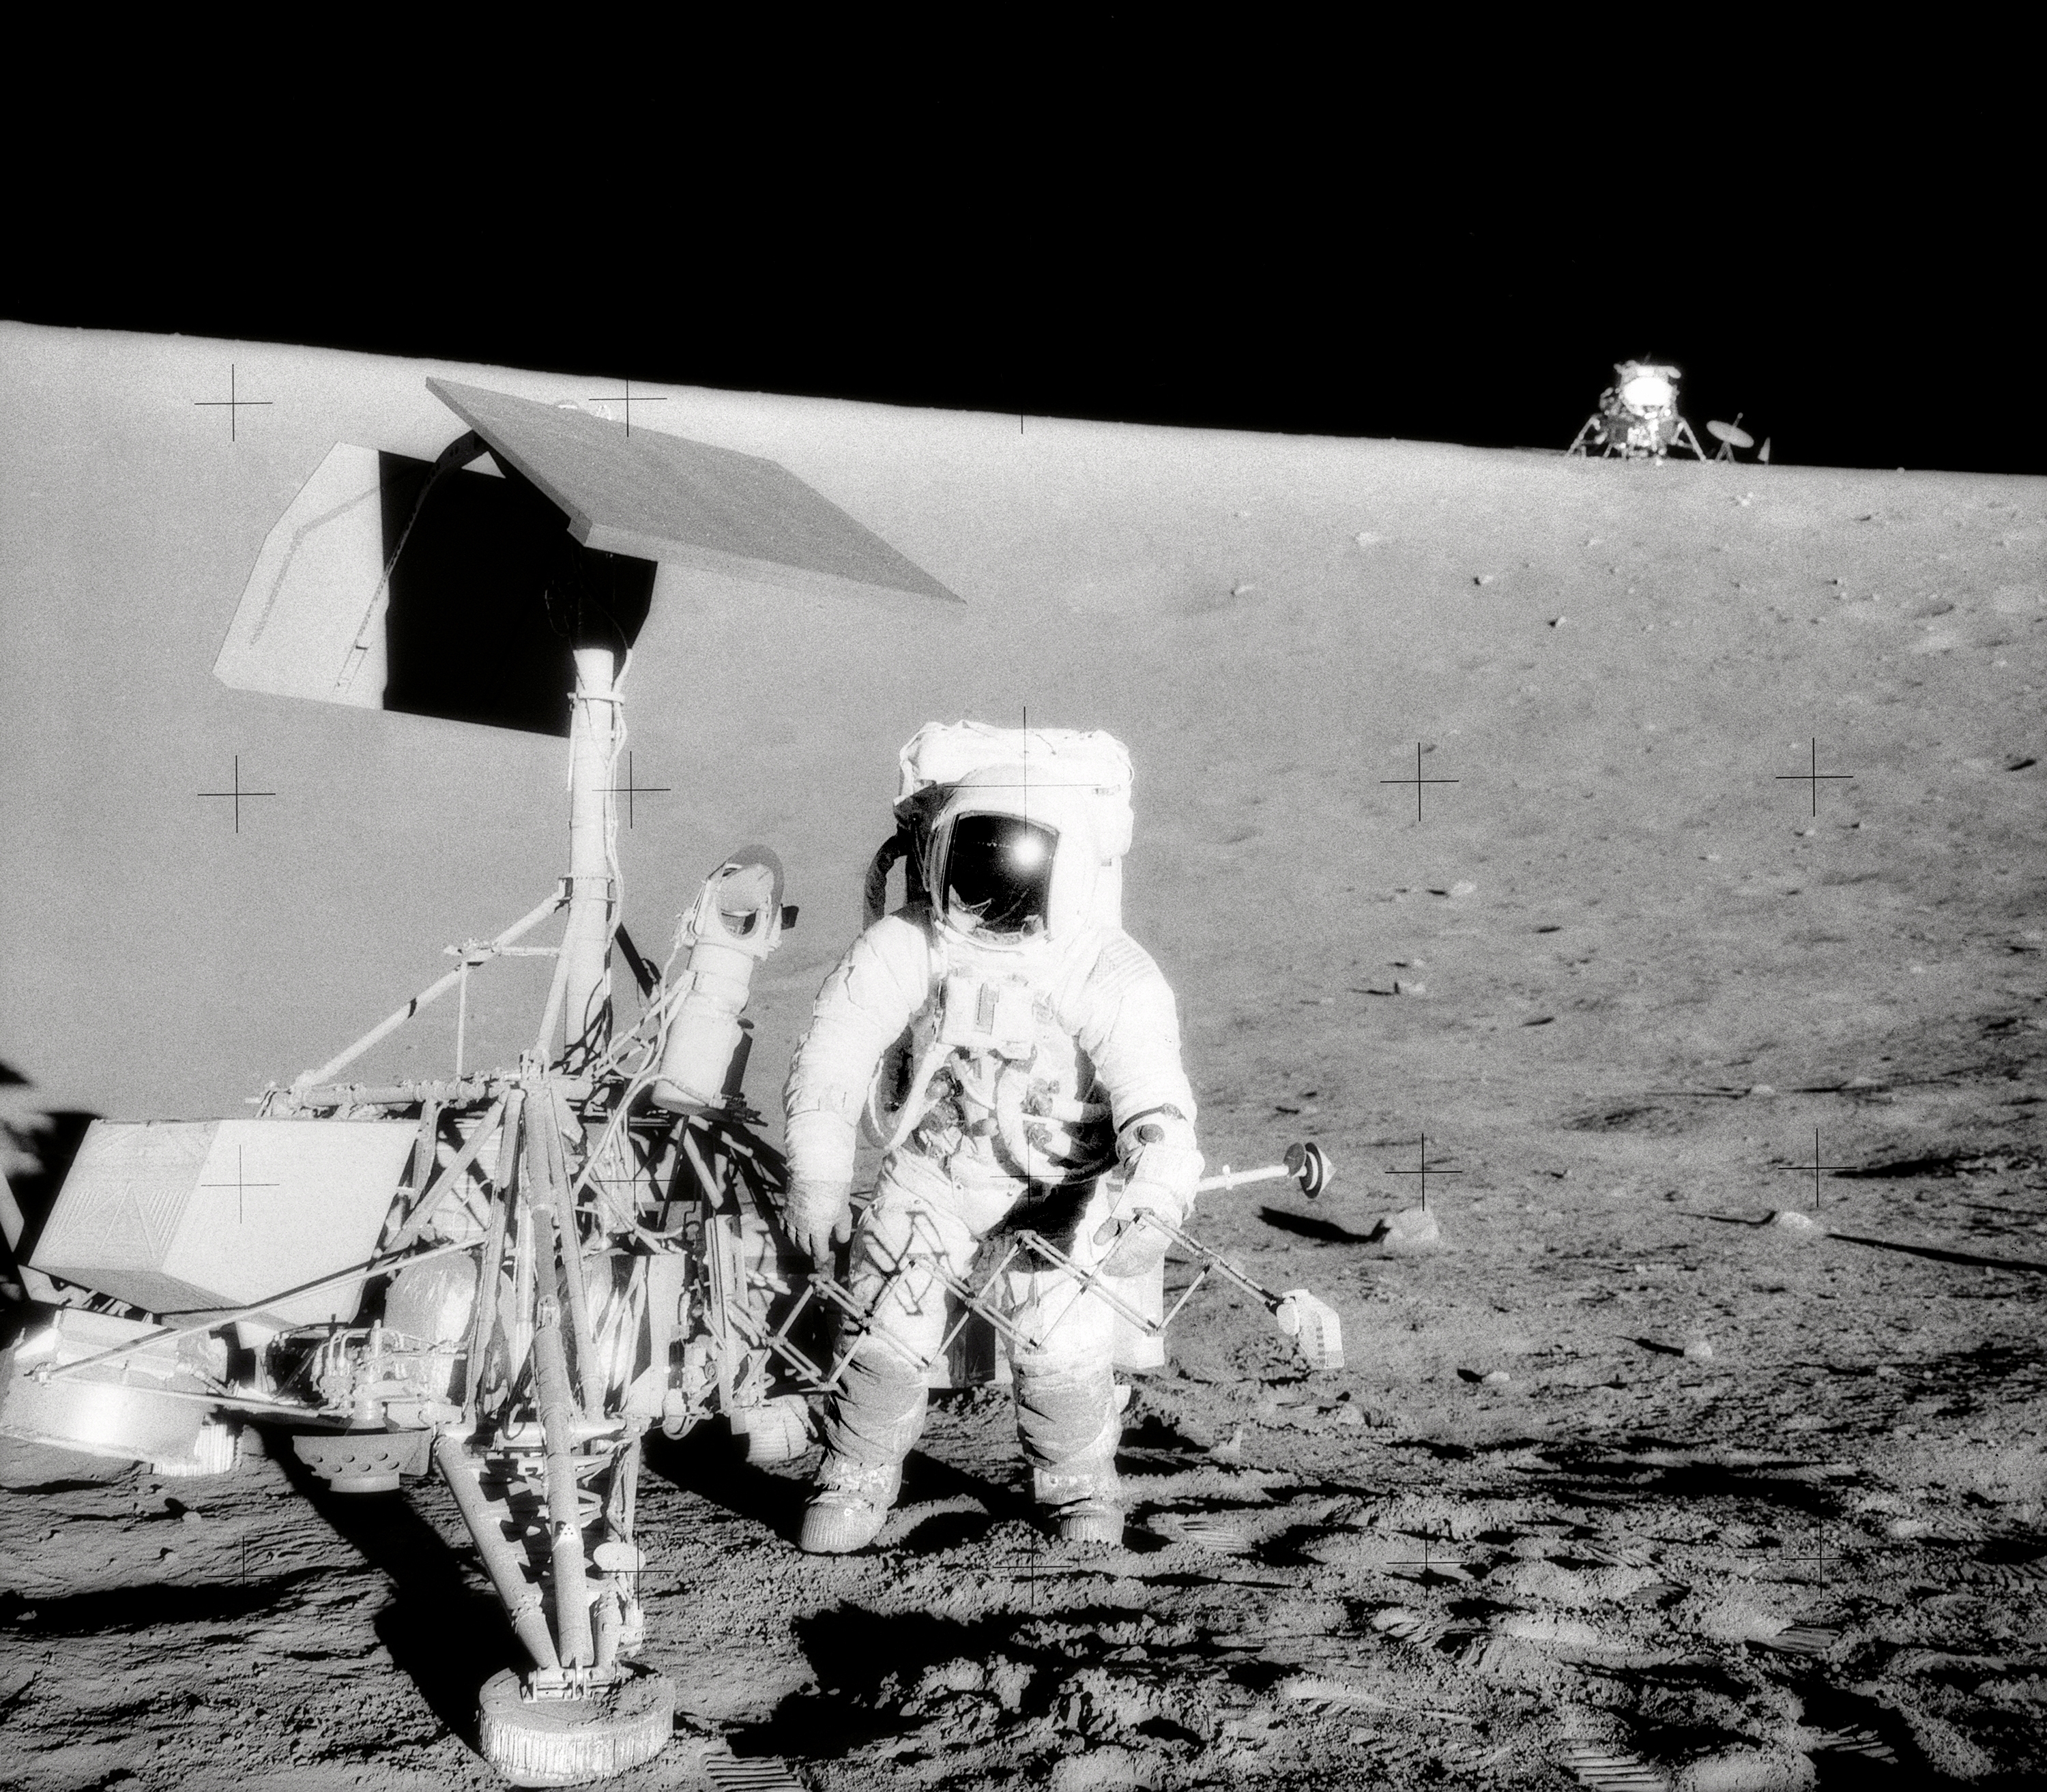 Black and white image of astronaut standing next to robotic lander on the surface of the Moon.